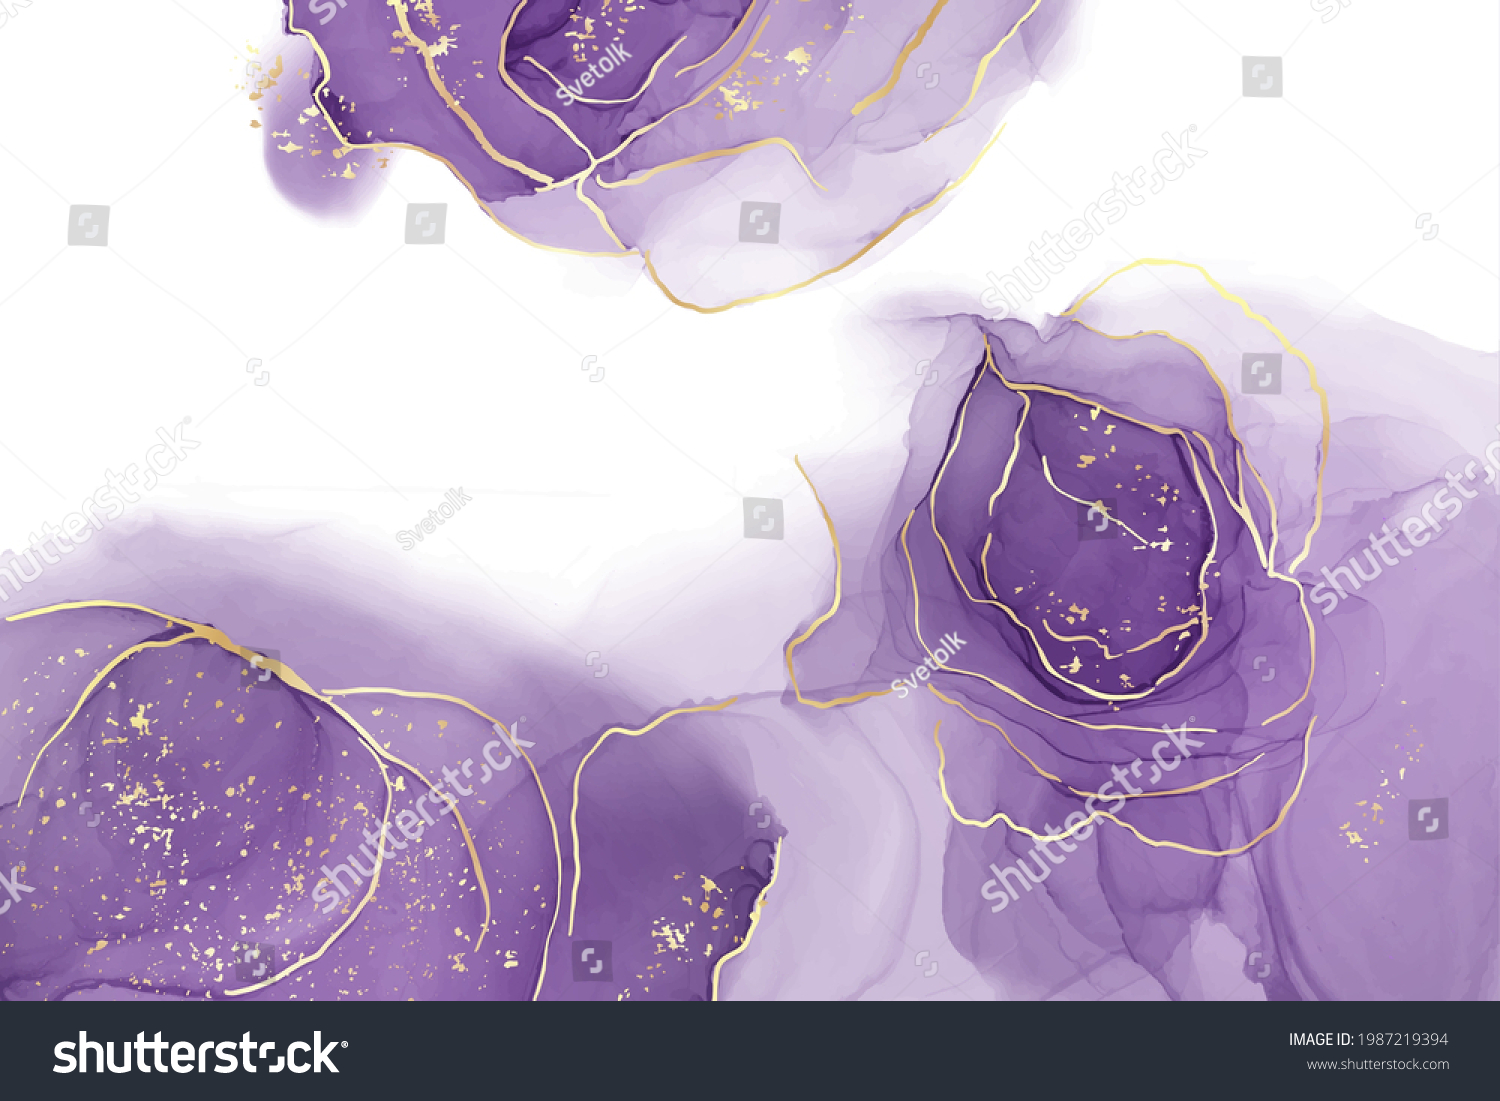 SVG of Mauve liquid watercolor background with golden glitter lines. Pastel violet marble alcohol ink drawing effect. Vector illustration of abstract stylish fluid art amethyst backdrop. svg